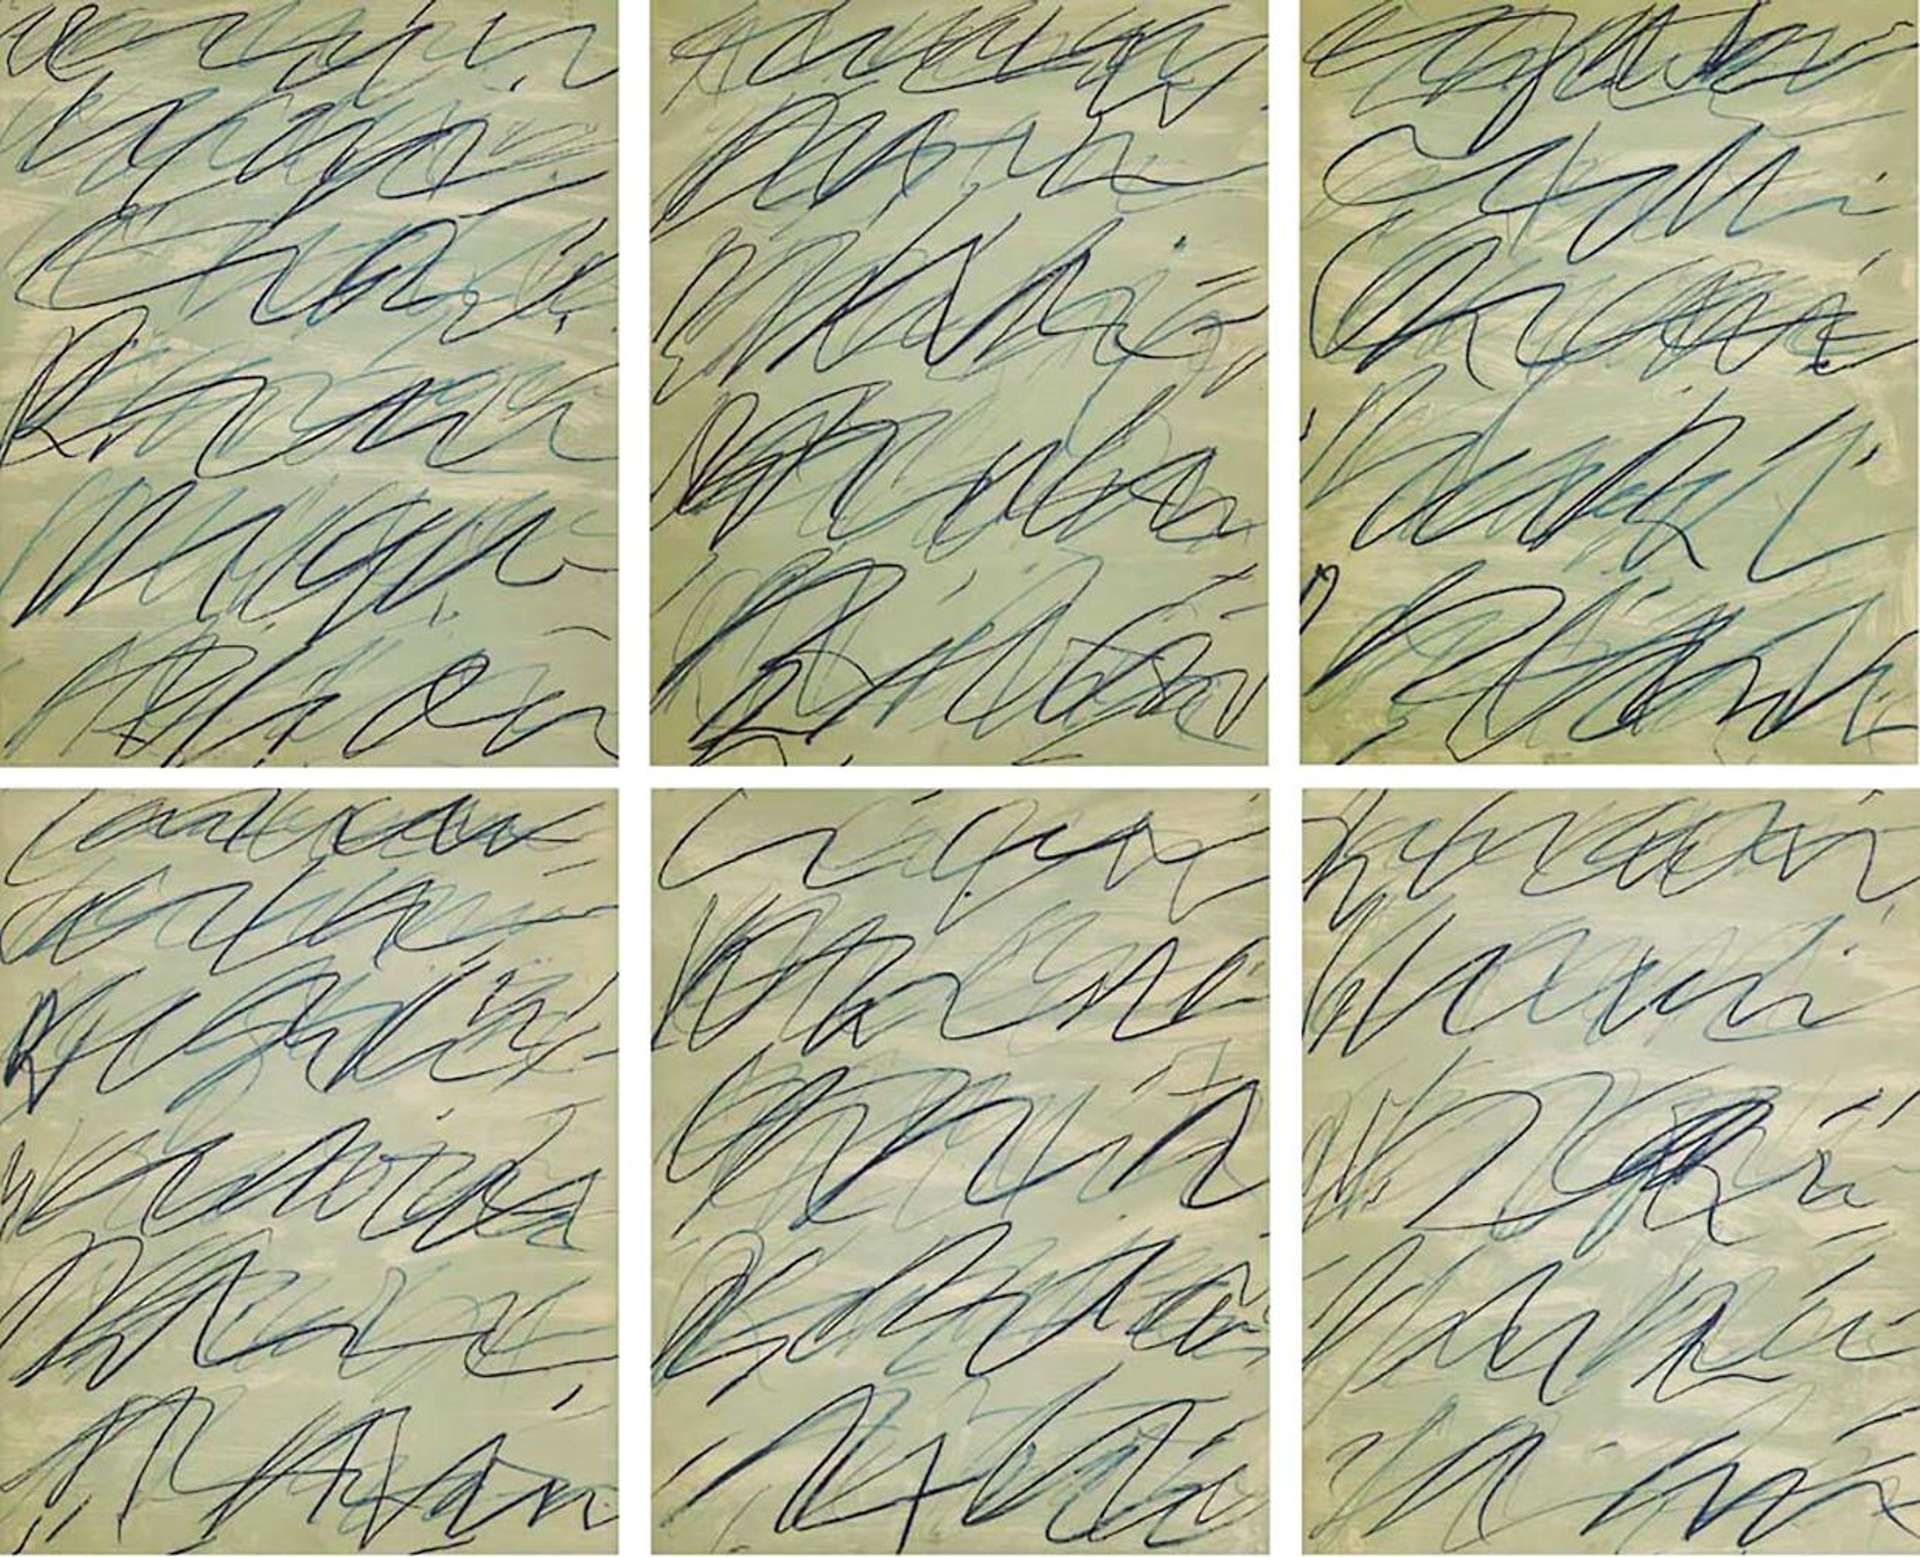 A full set of six prints by Cy Twombly, with his signature rounded scrawl.